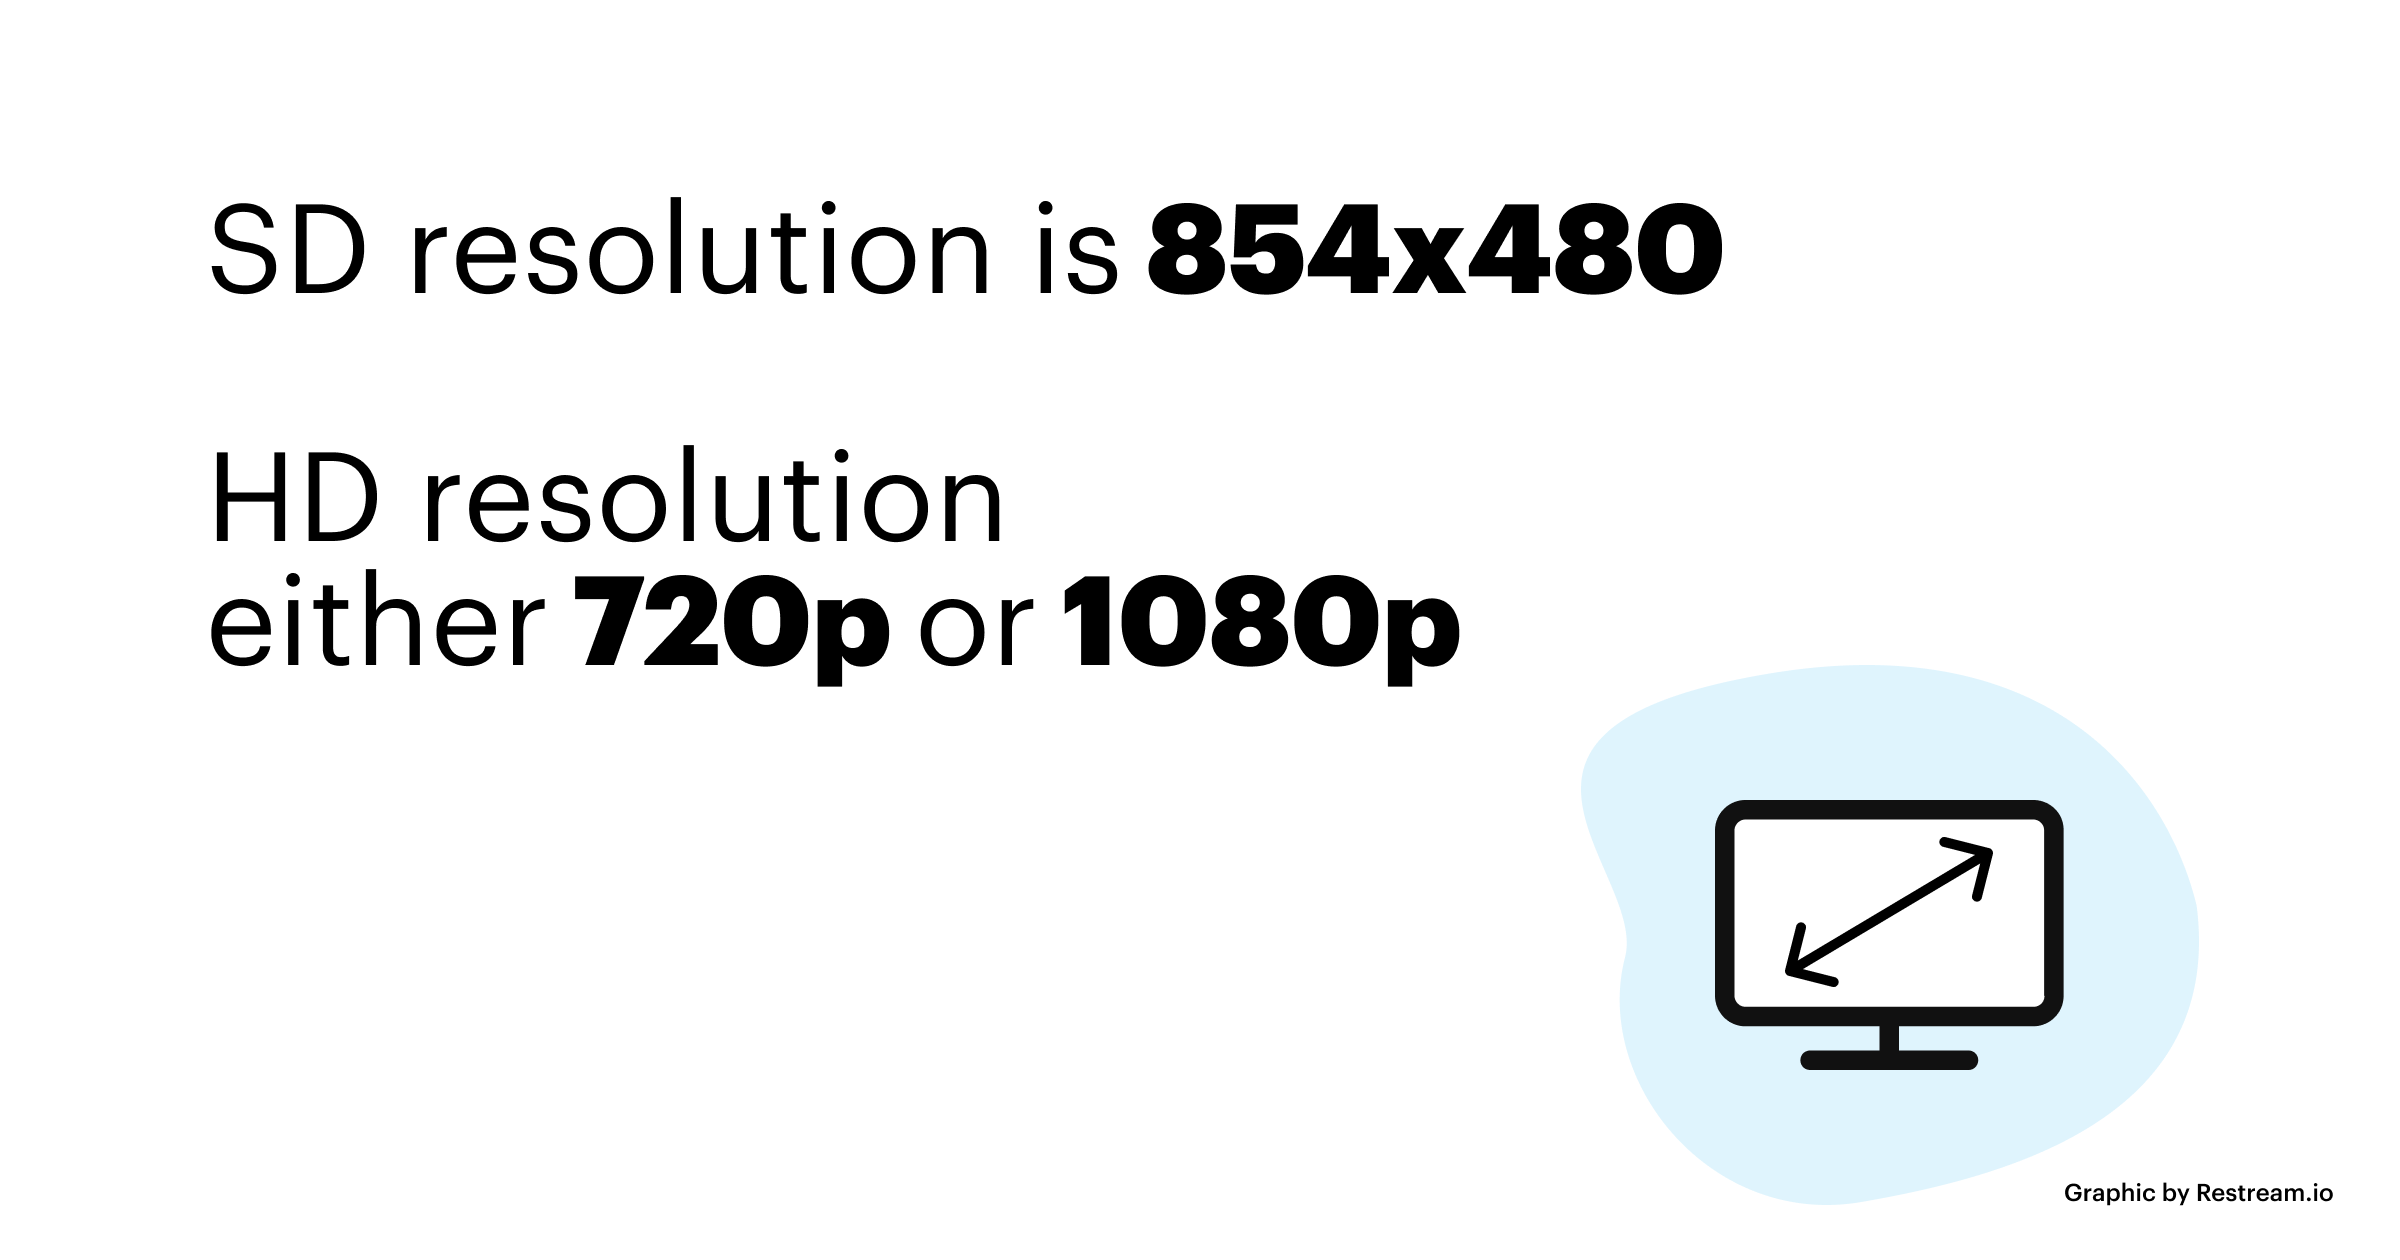 SD resolution is 854x480, HD resolution either 720p or 1080p